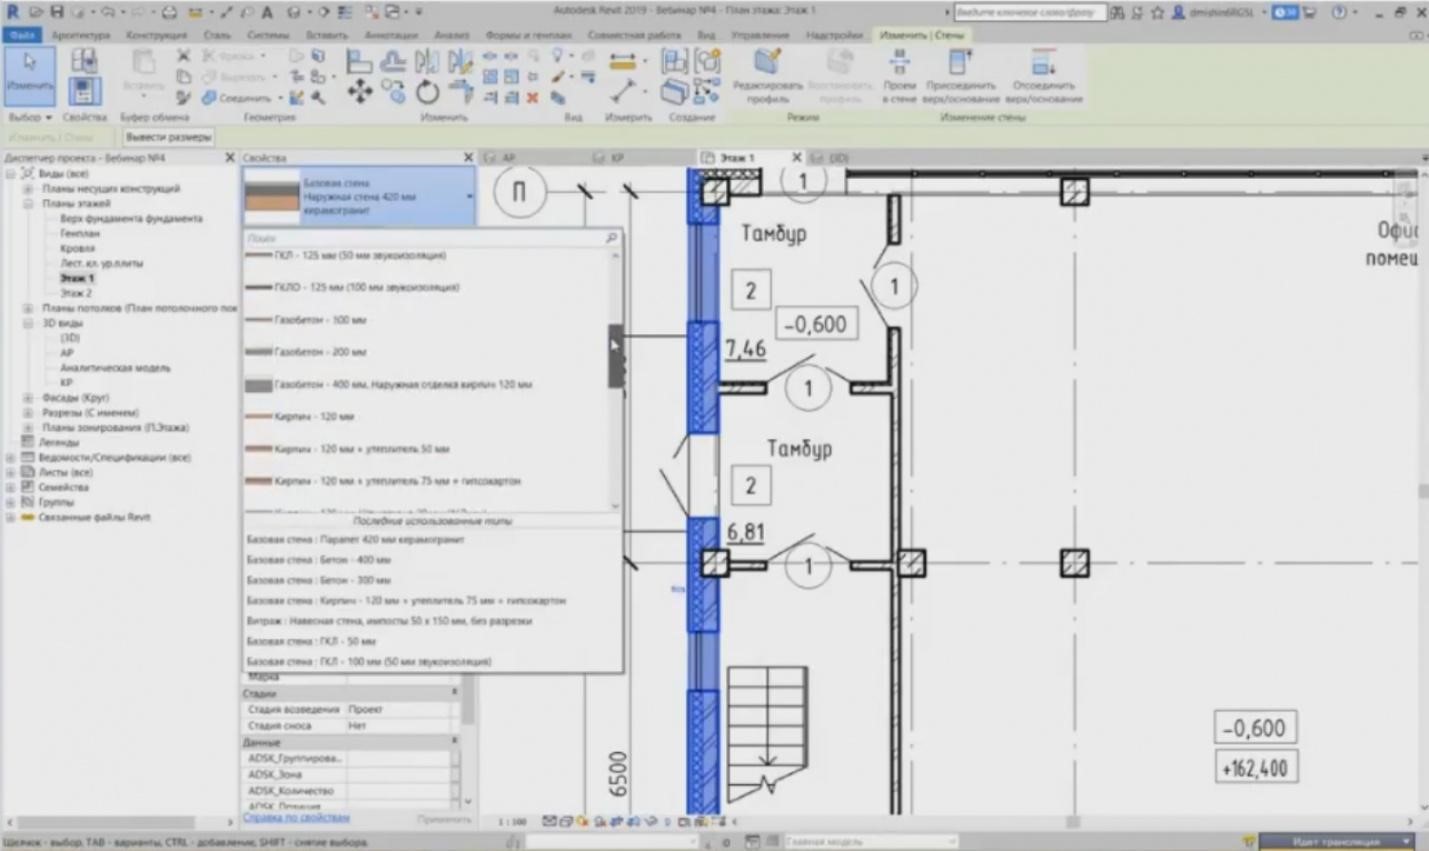 BIM DESIGN IN REVIT. CREATING ARCHITECTURAL AND STRUCTURAL ELEMENTS. PAGE 2-17